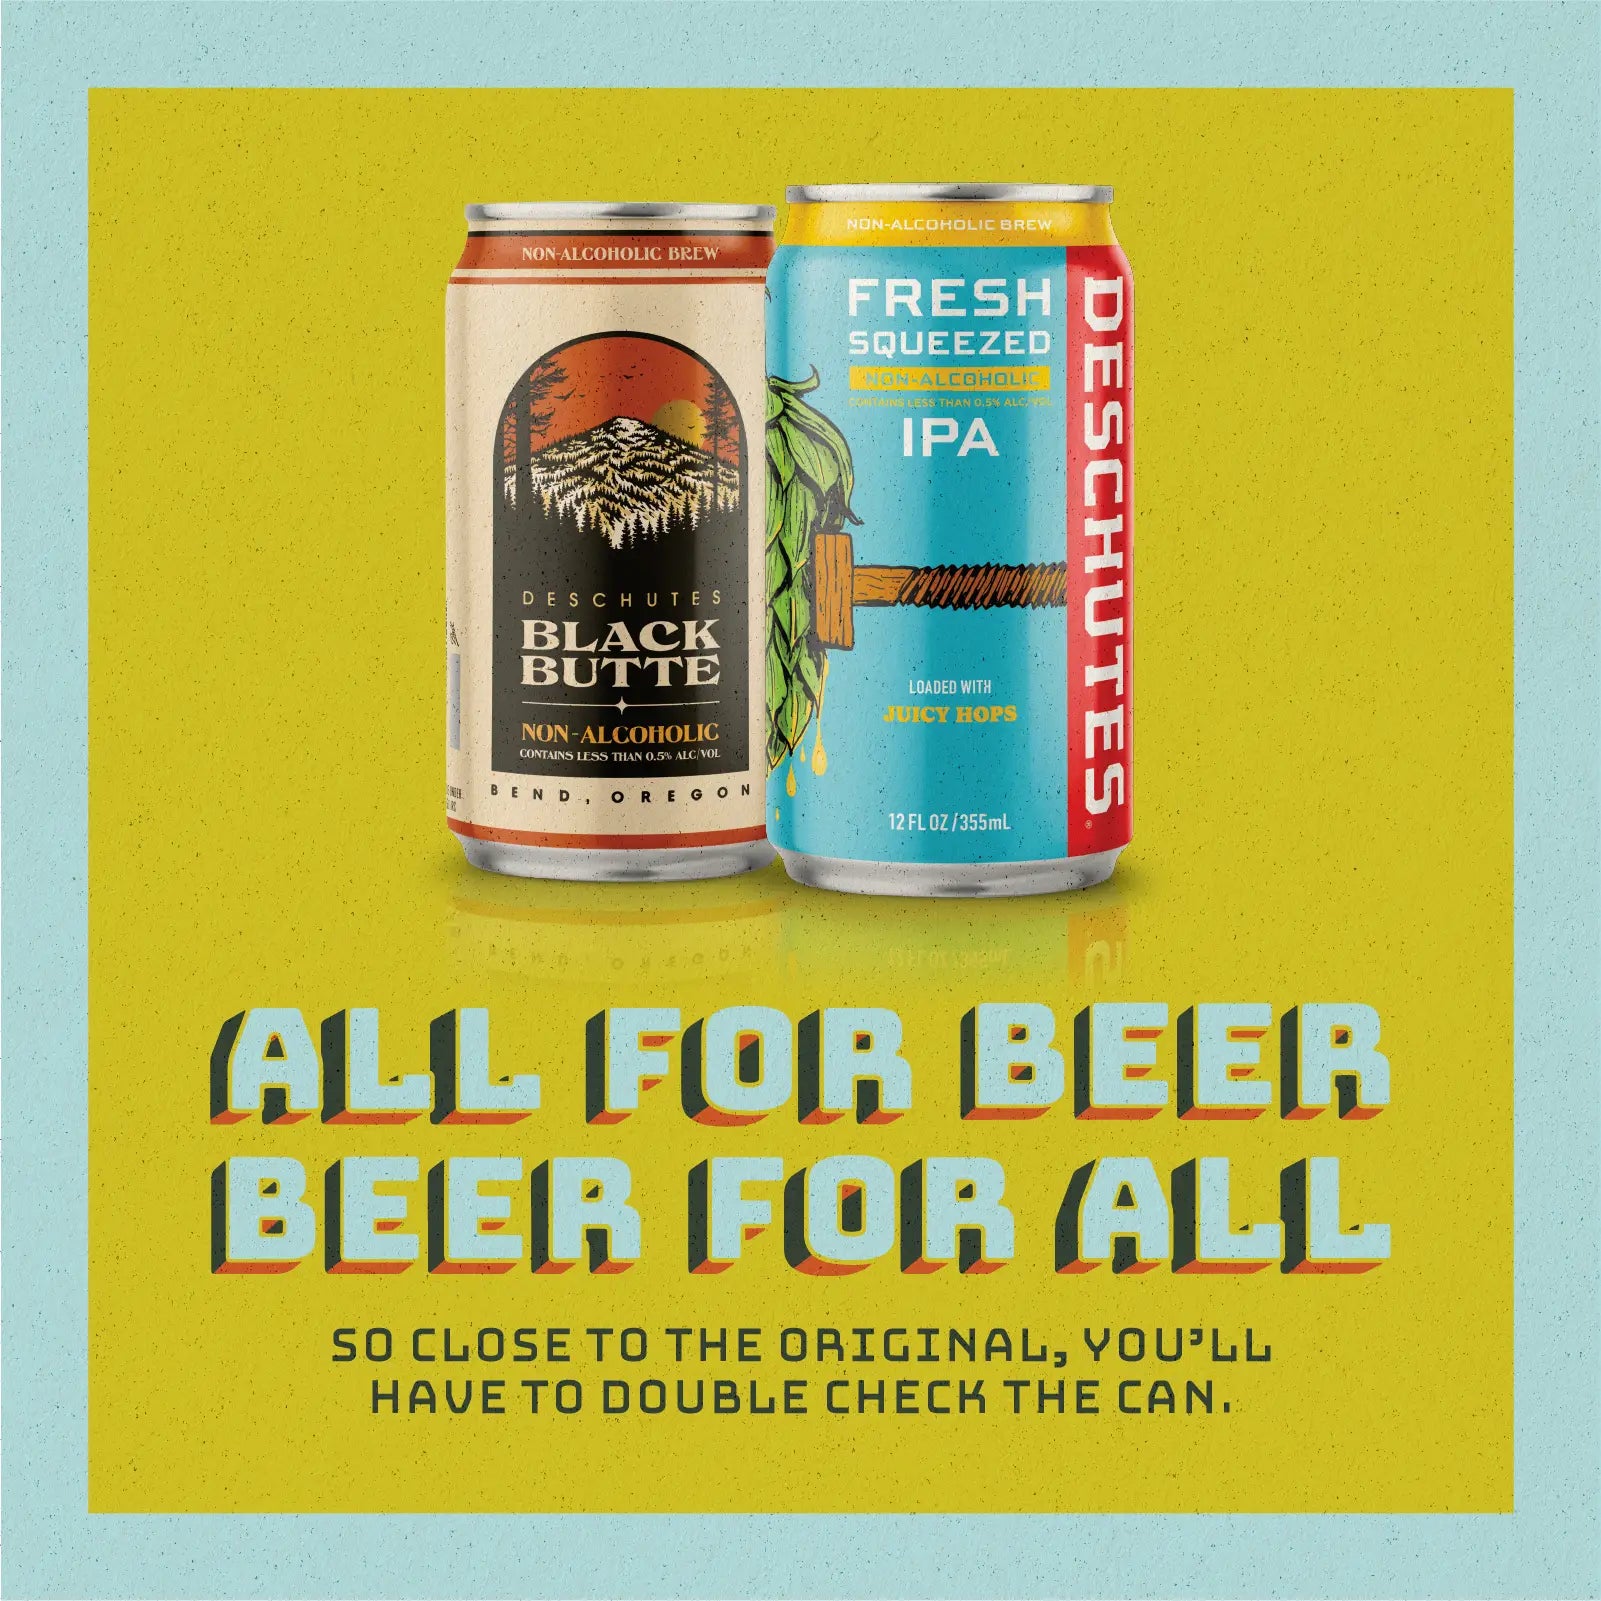 A promo graphic celebrating Black Butte NA and Fresh Squeezed NA